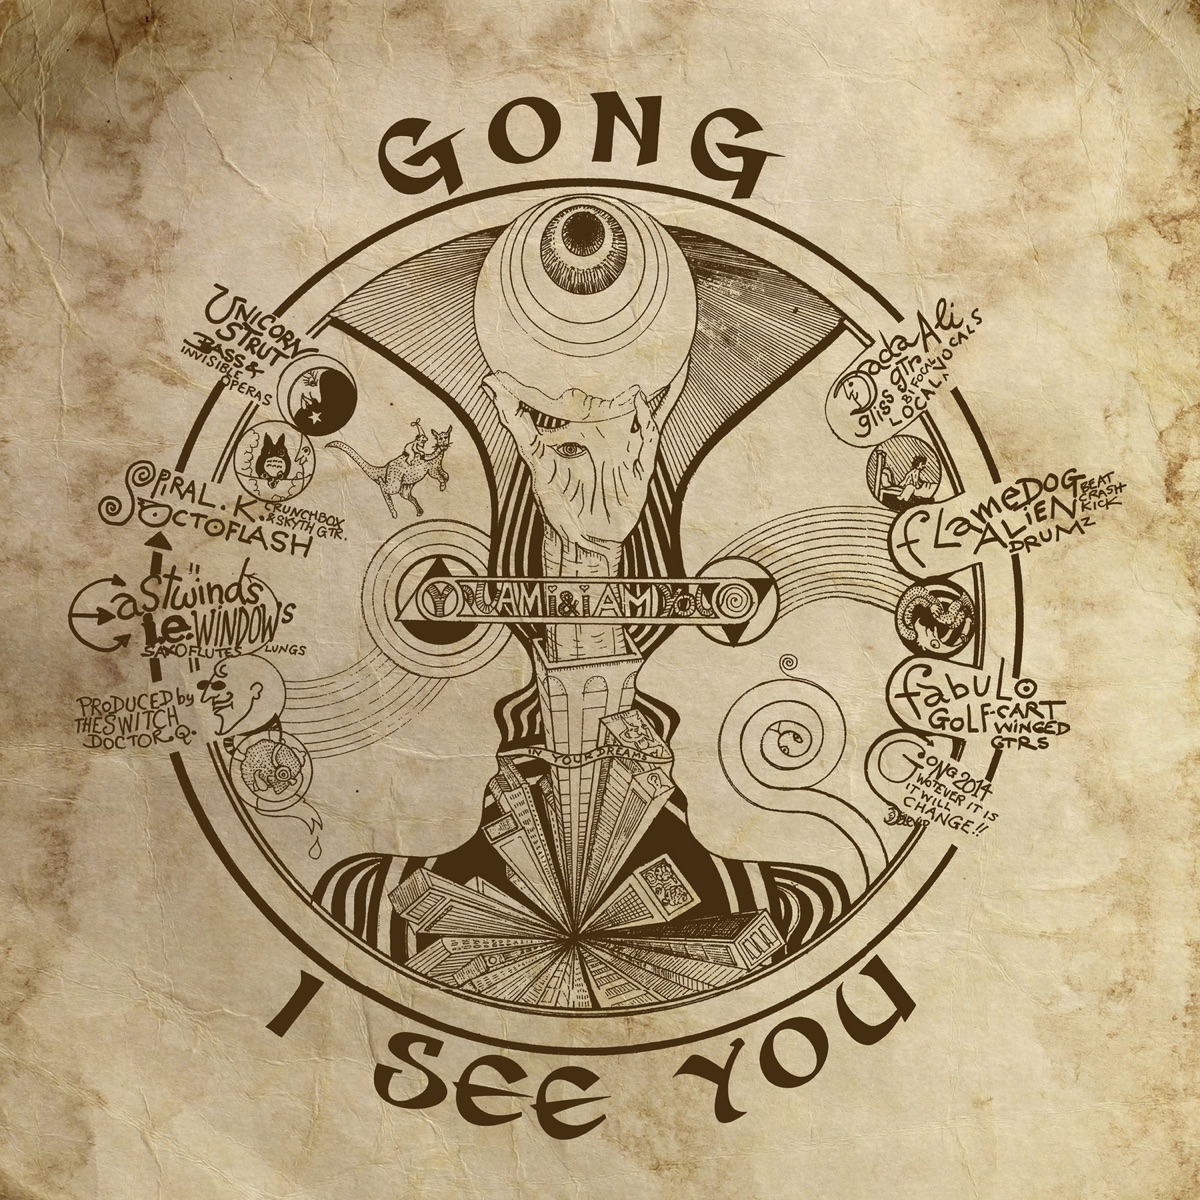 Flying Teapot - Radio Gnome Invisible, Pt. 1 by Gong on Apple Music